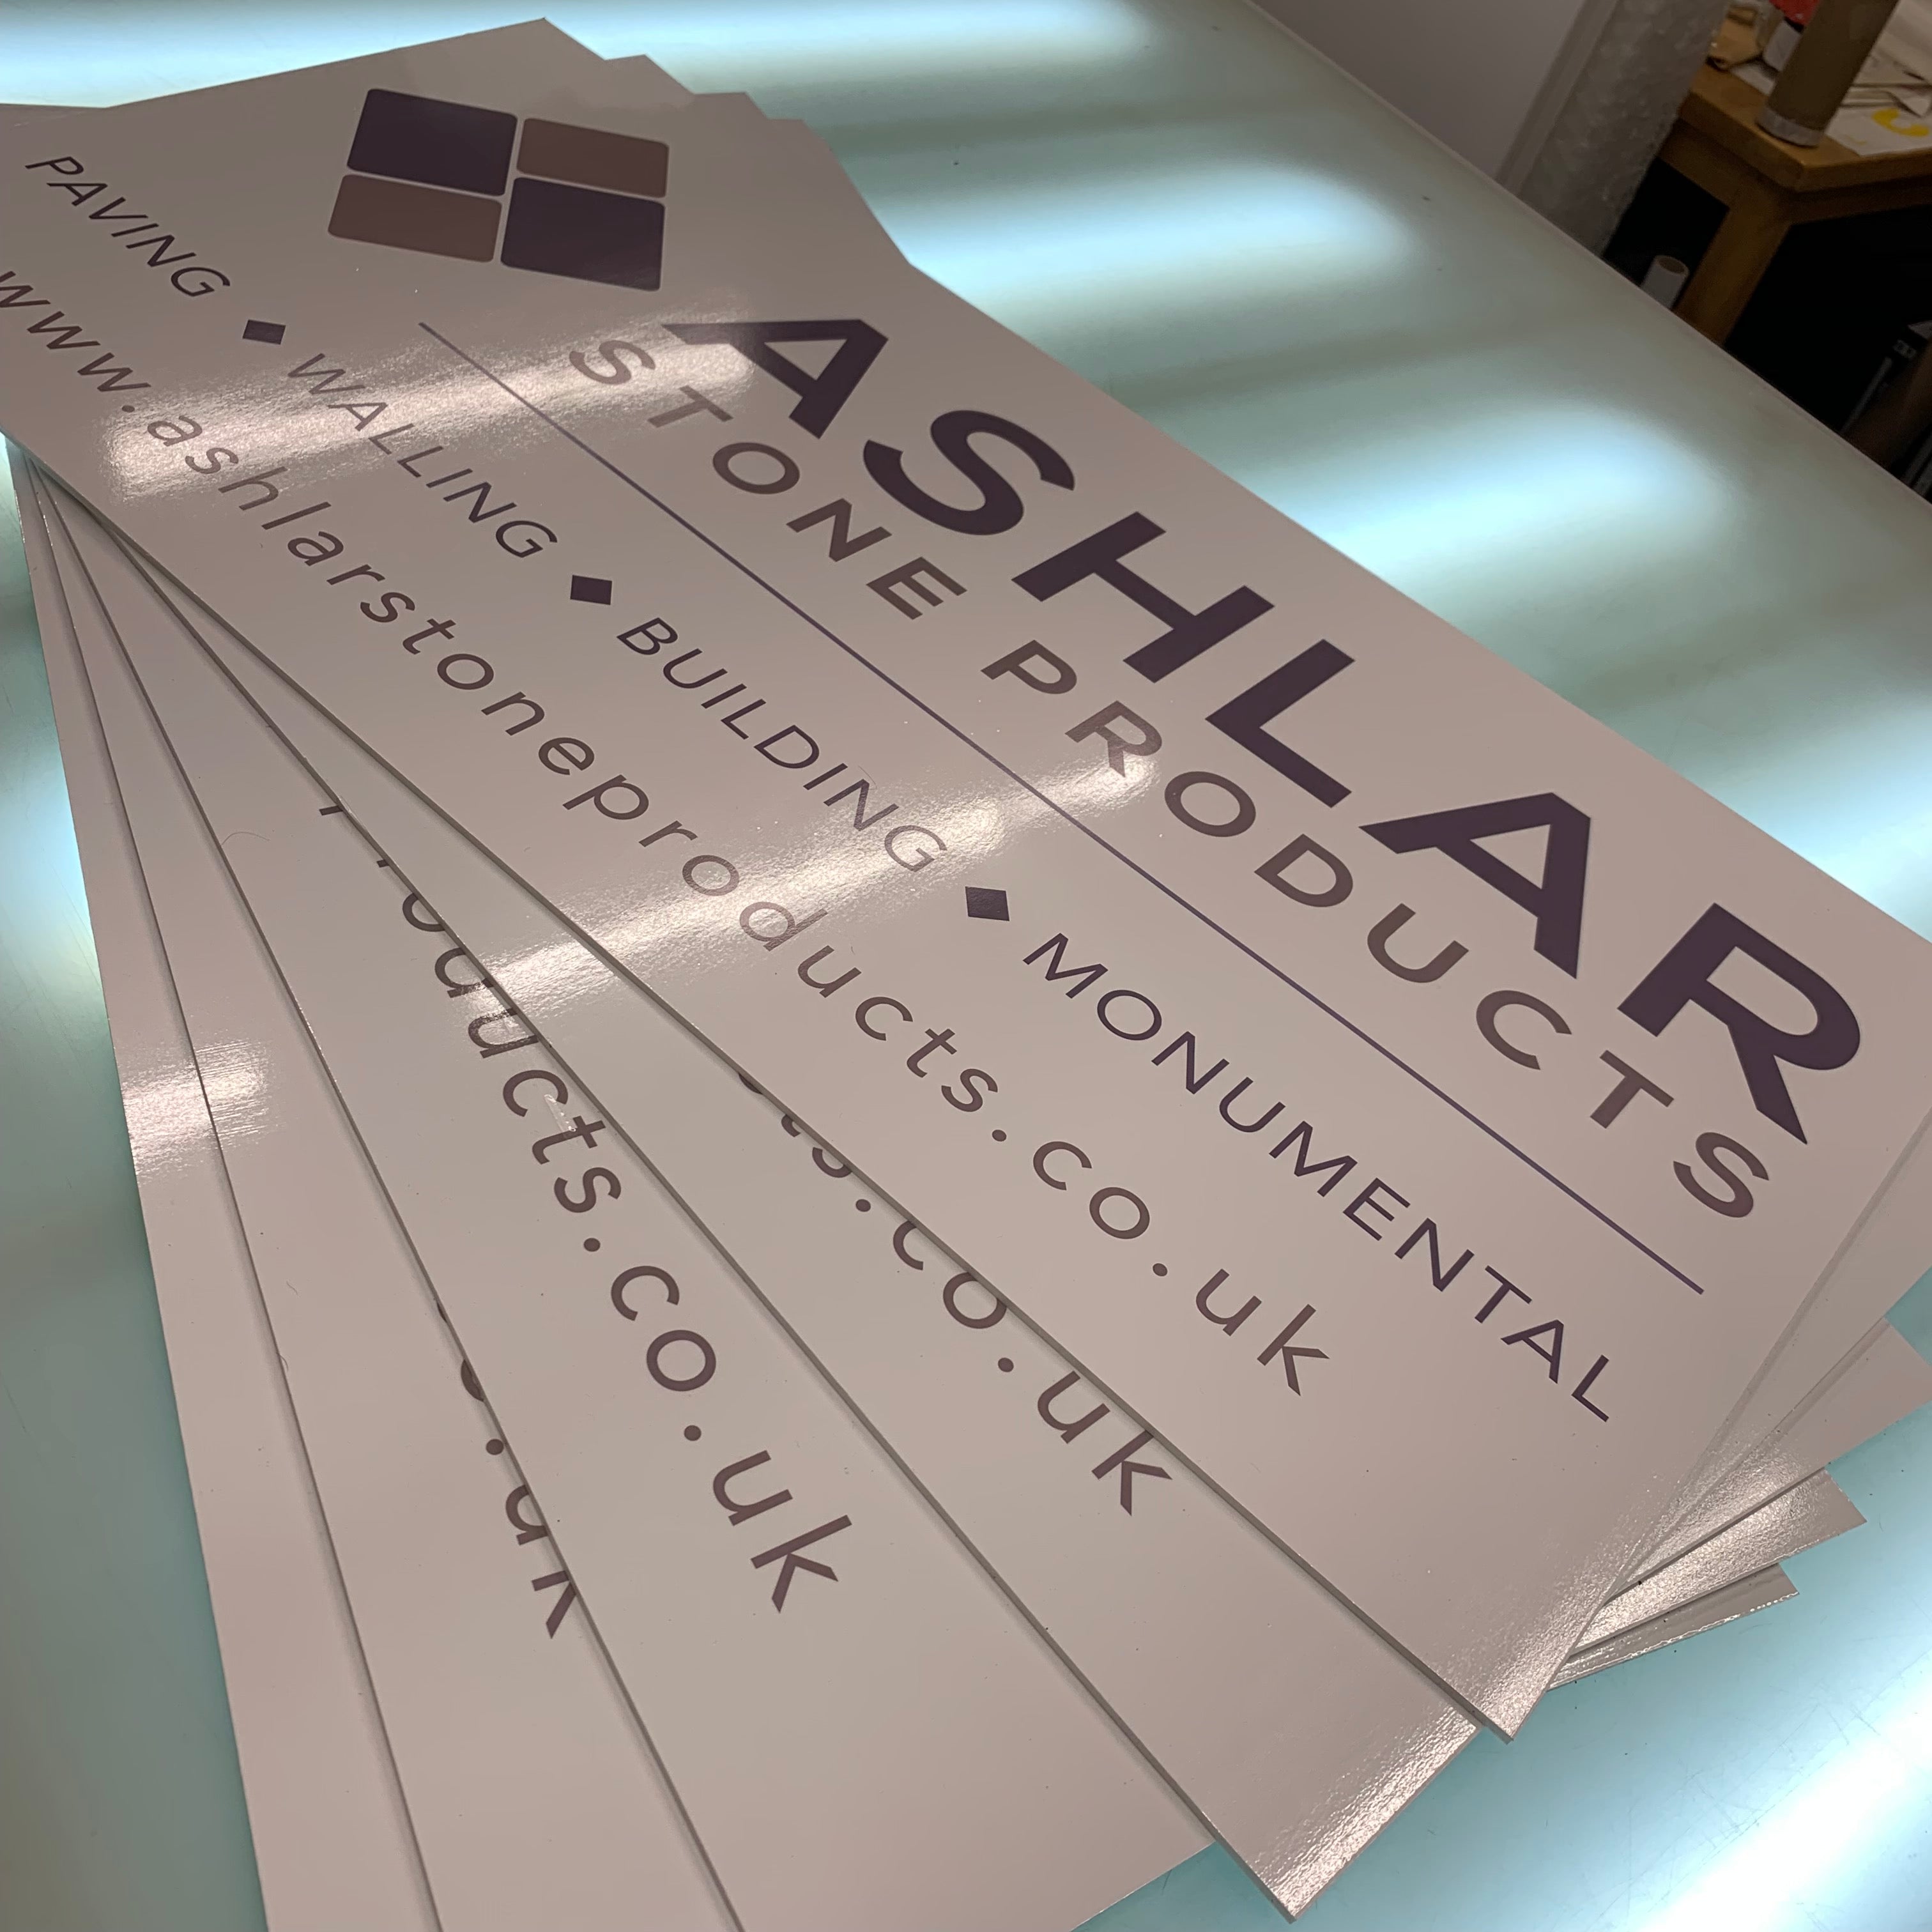 5mm Digitally Printed Foamex Sign with Lamination 'A' Sizes